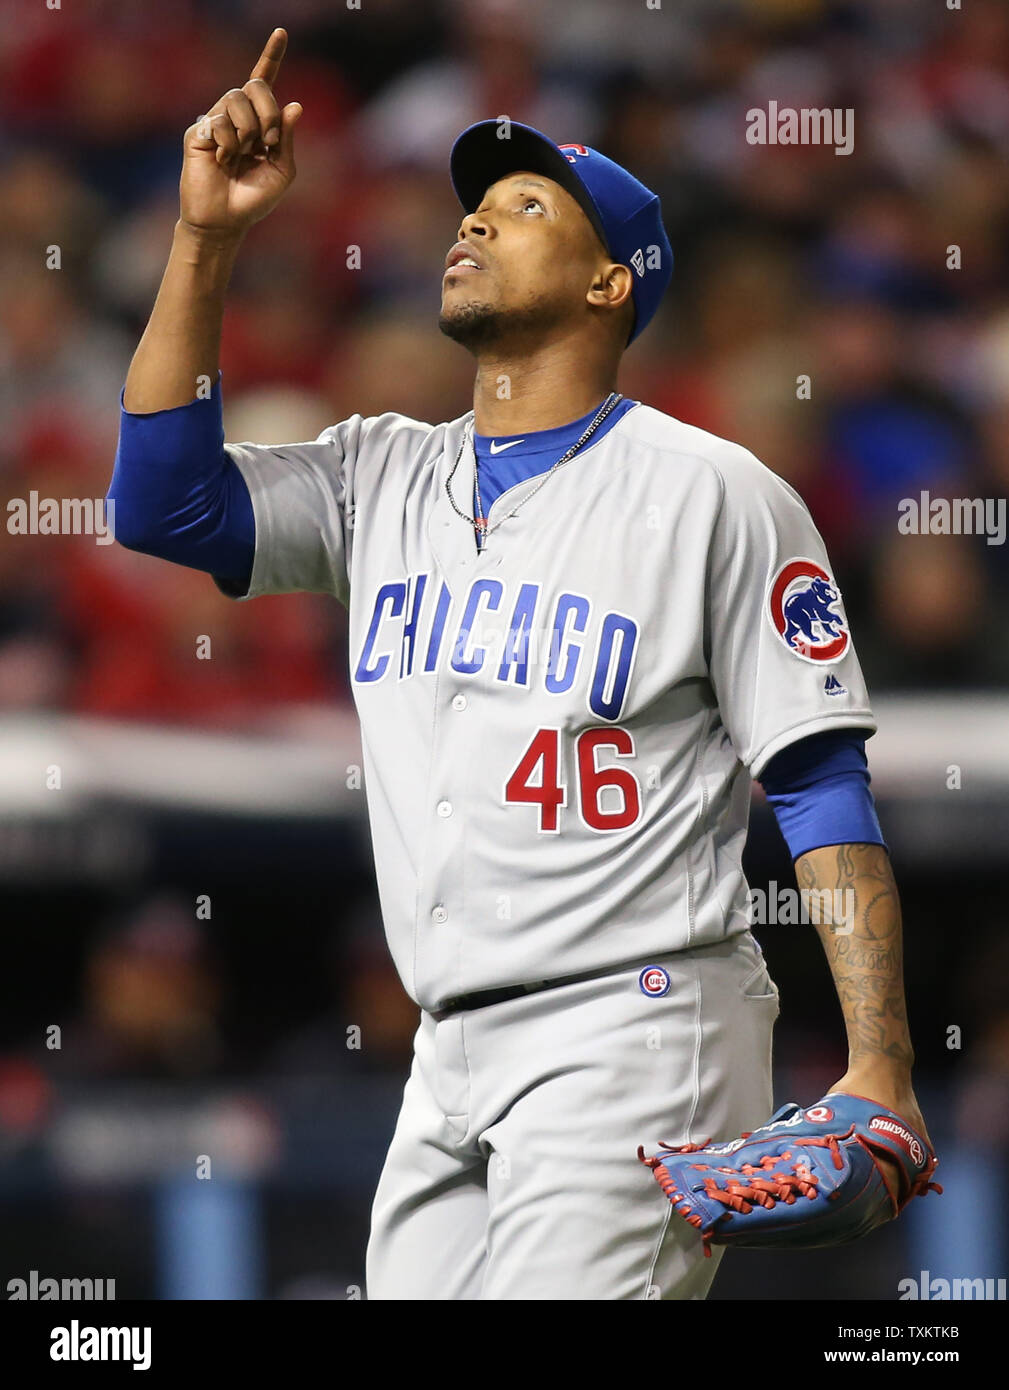 Chicago Cubs reliever Pedro Strop gestures after finishing the sixth inning  against the Cleveland Indians in game 1 of the World Series at Progressive  Field in Cleveland, Ohio on October 25, 2016.